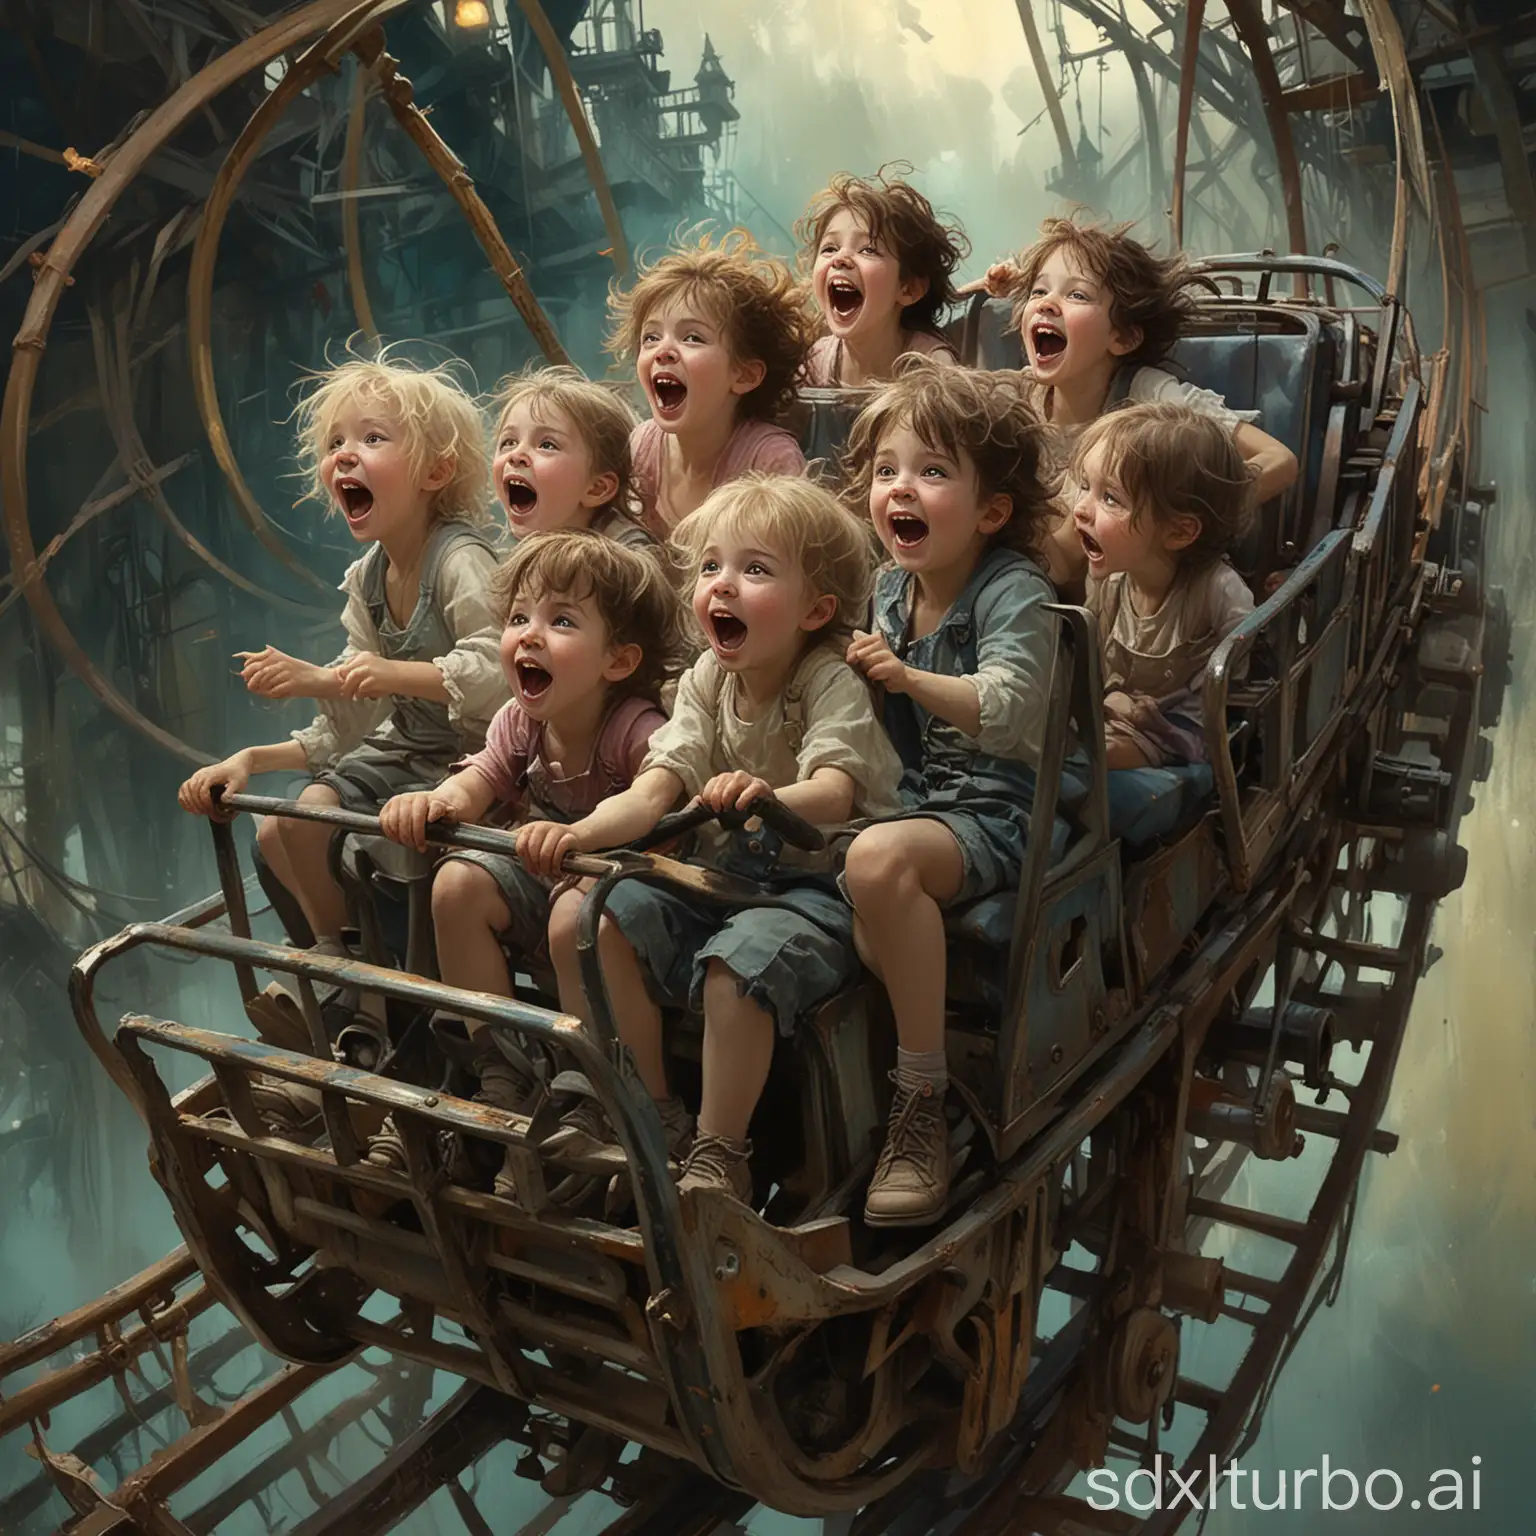 A group of children sitting in a roller coaster, screaming, going down, having fun, in the style of Harrison Fisher and Brian Froud and Jeremy Mann,  
Whimsical, vibrant colors, gloss, sweetness, surreal, thick brush strokes, layered textures, mythical, magical. 